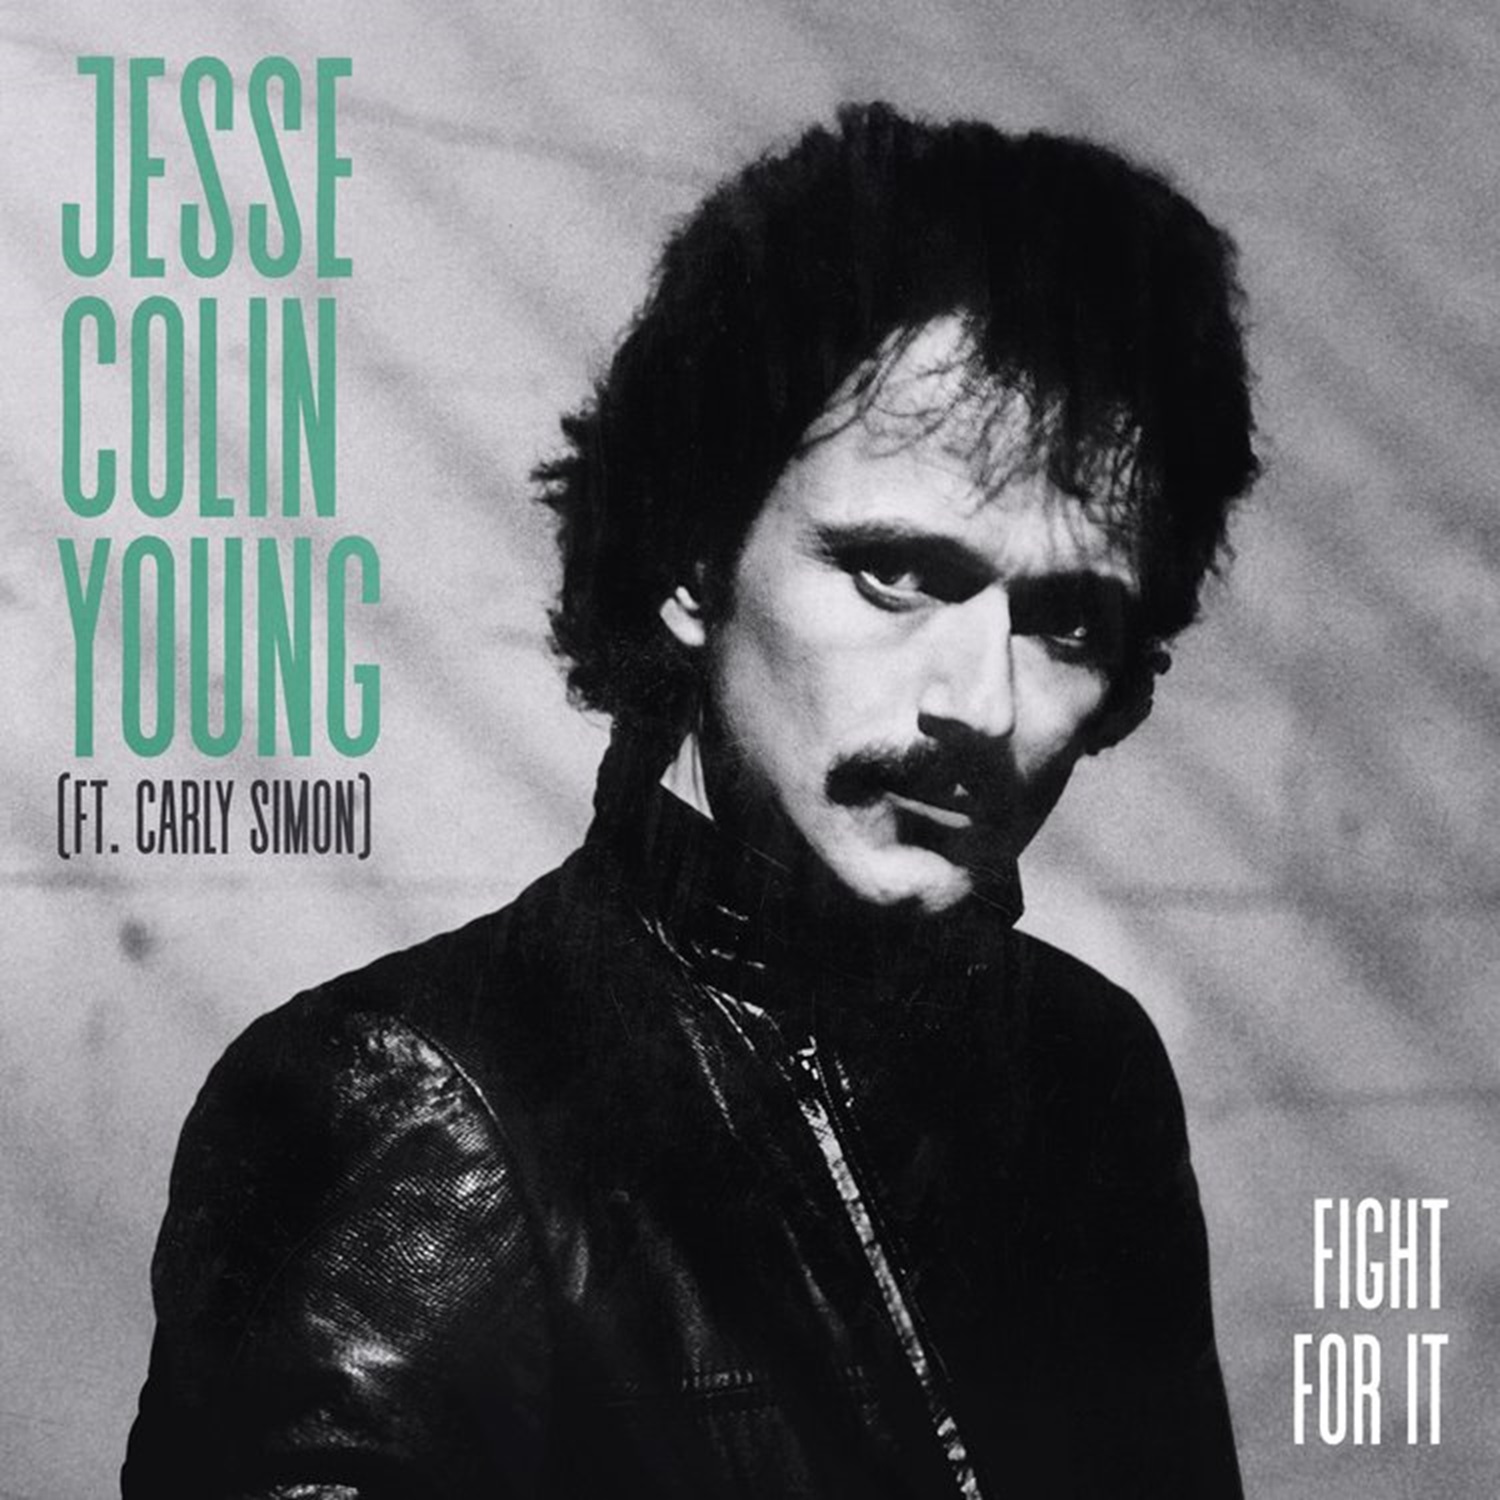 Jesse Colin Young Re-Releases Single "Fight For It" featuring Carly Simon